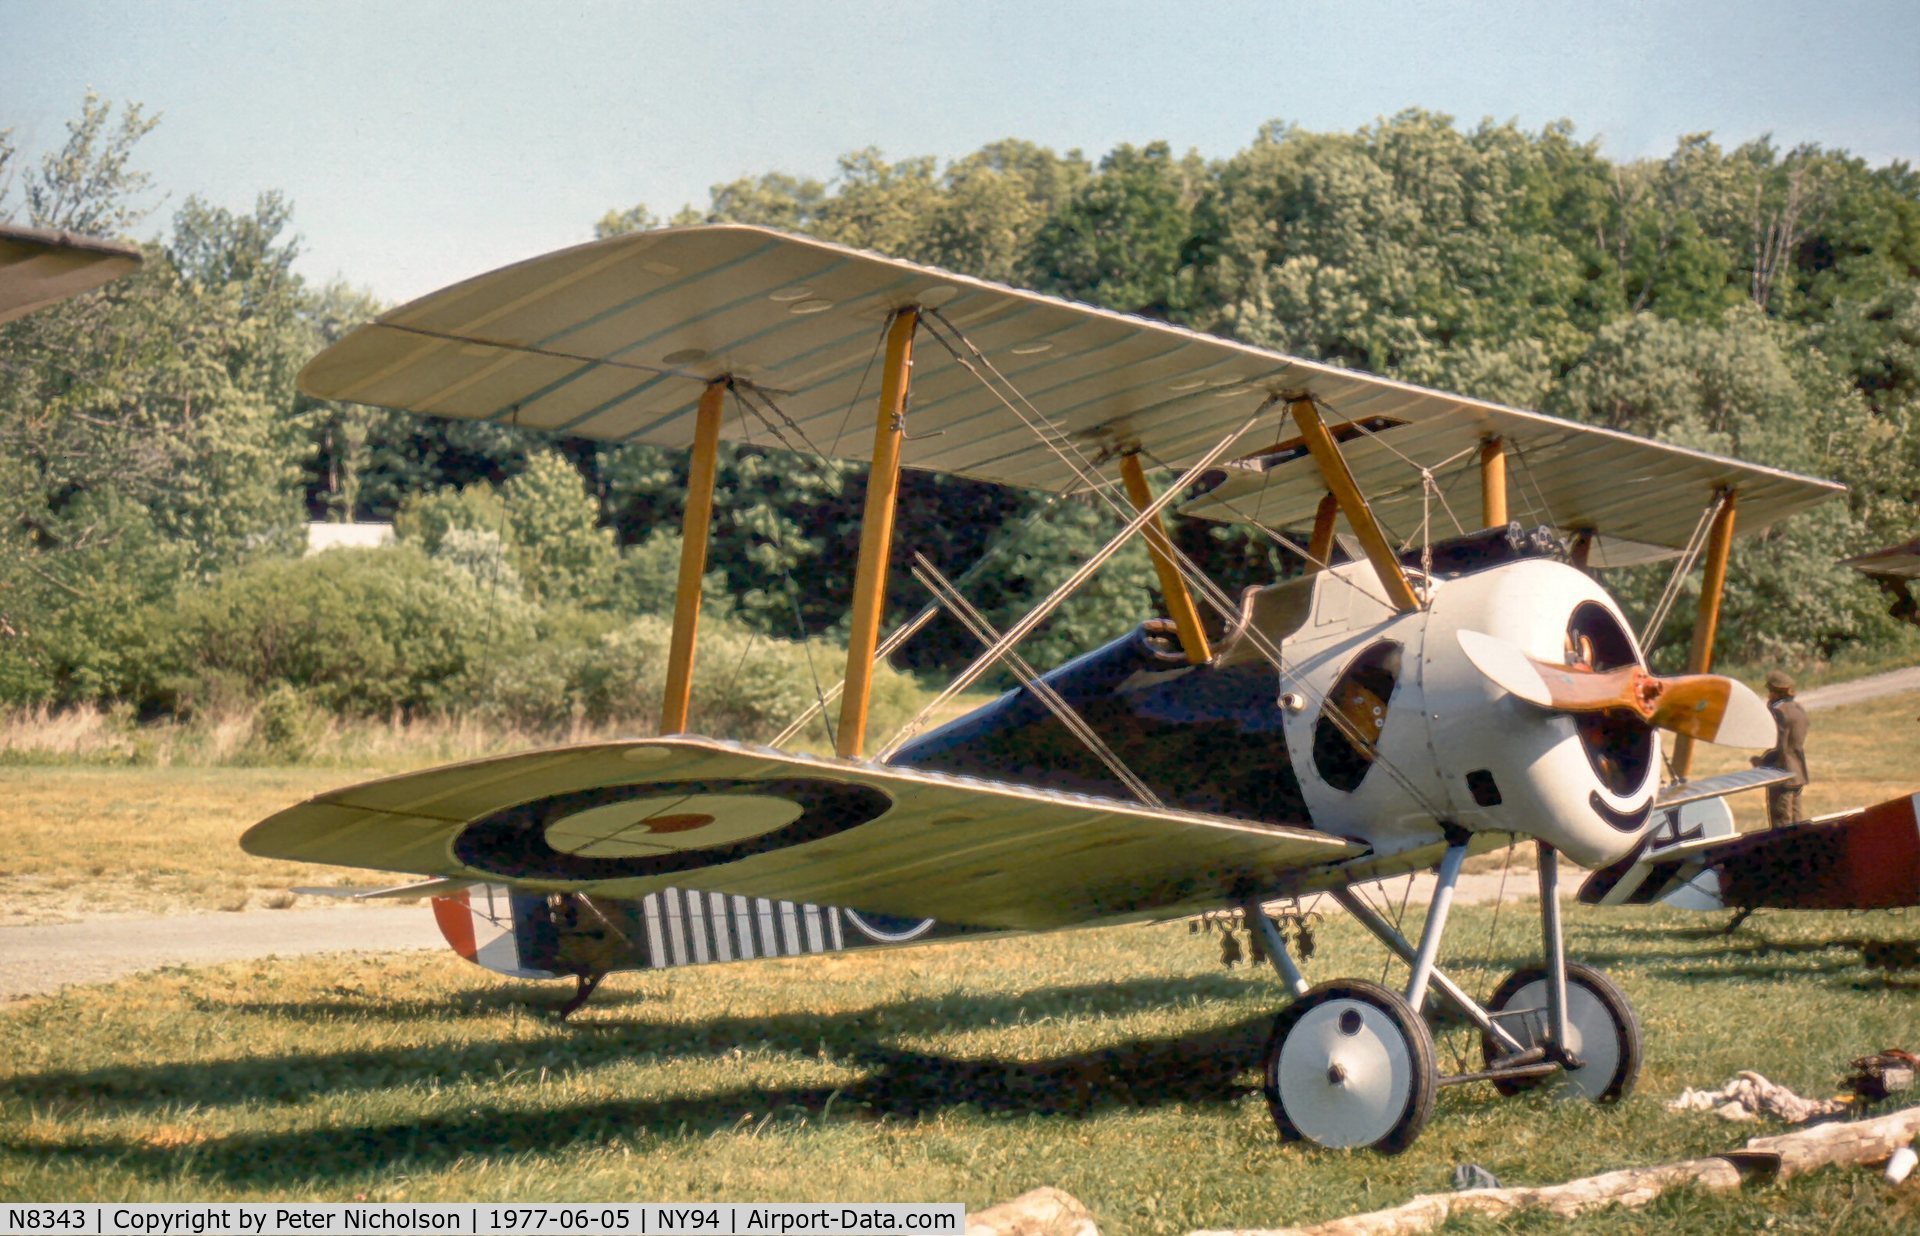 N8343, 1980 Sopwith F.1 Camel Replica C/N DS-200, Sopwith Camel at Cole Palen's June 1977 Rhinebeck Airshow.